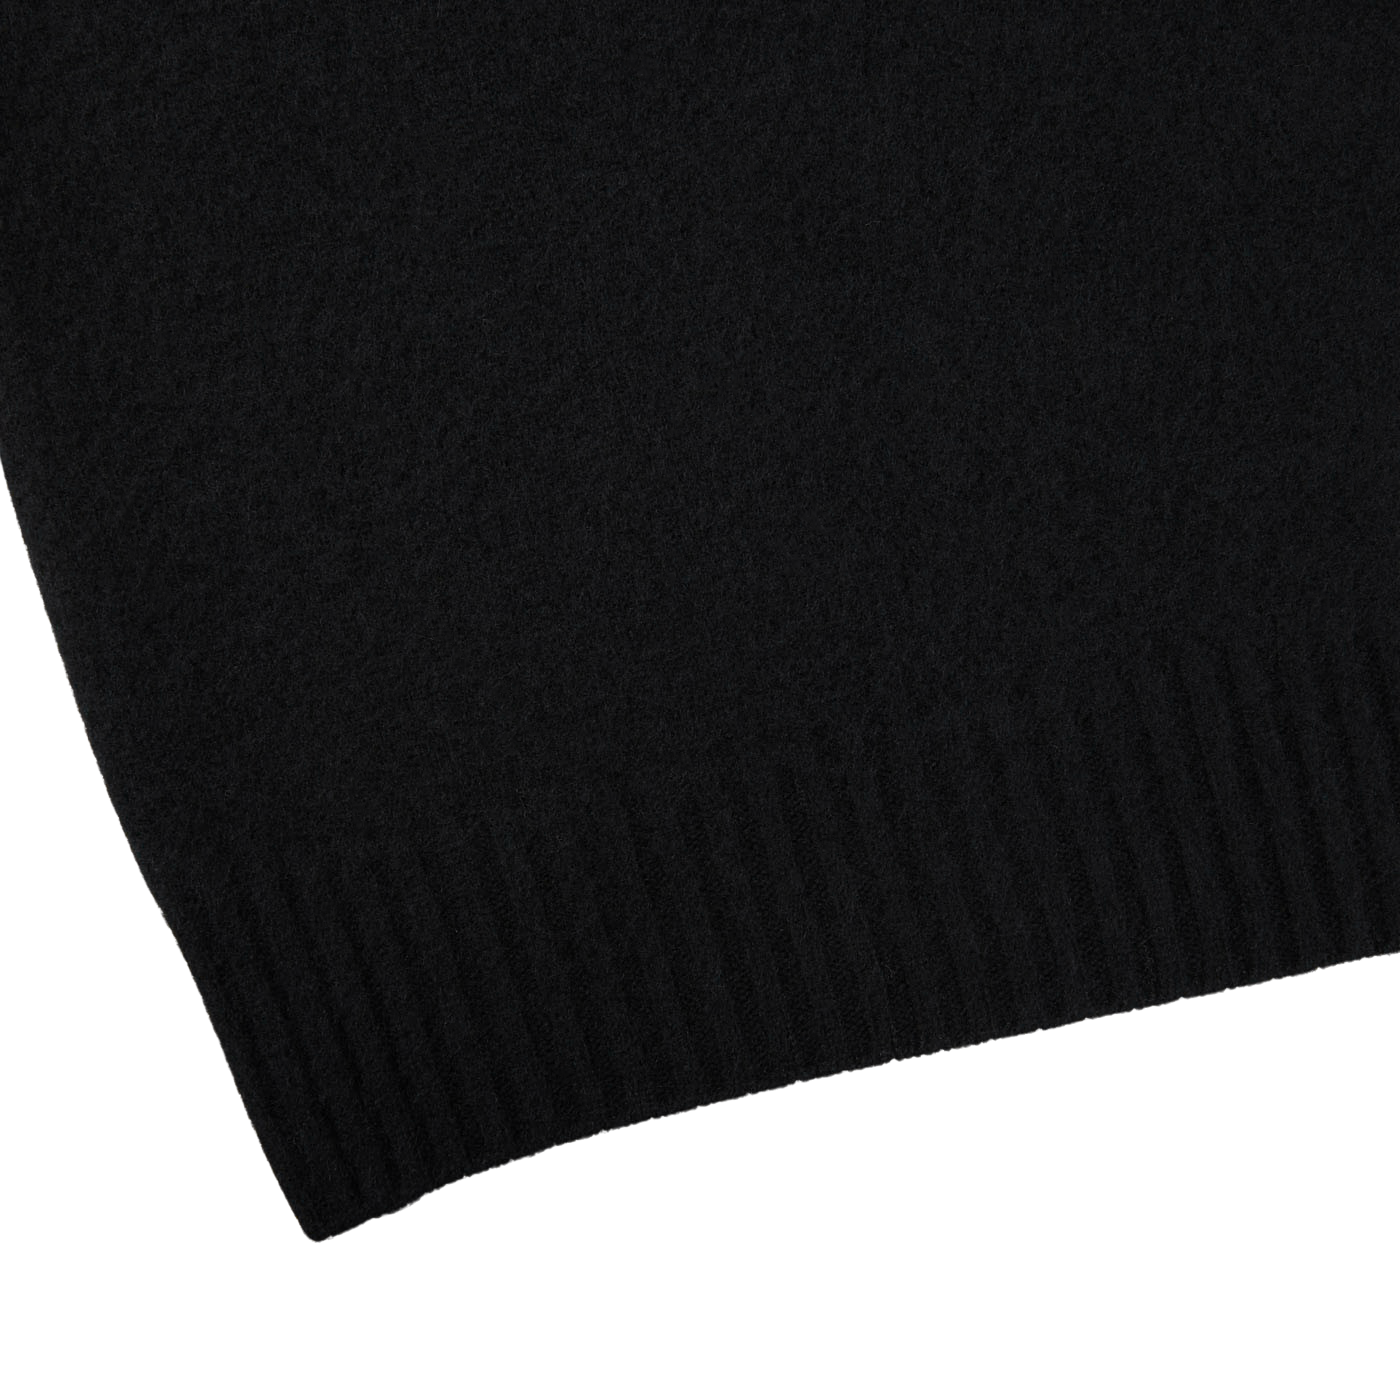 A close up of a Drumohr Black Brushed Lambswool High Neck Sweater on a white surface.